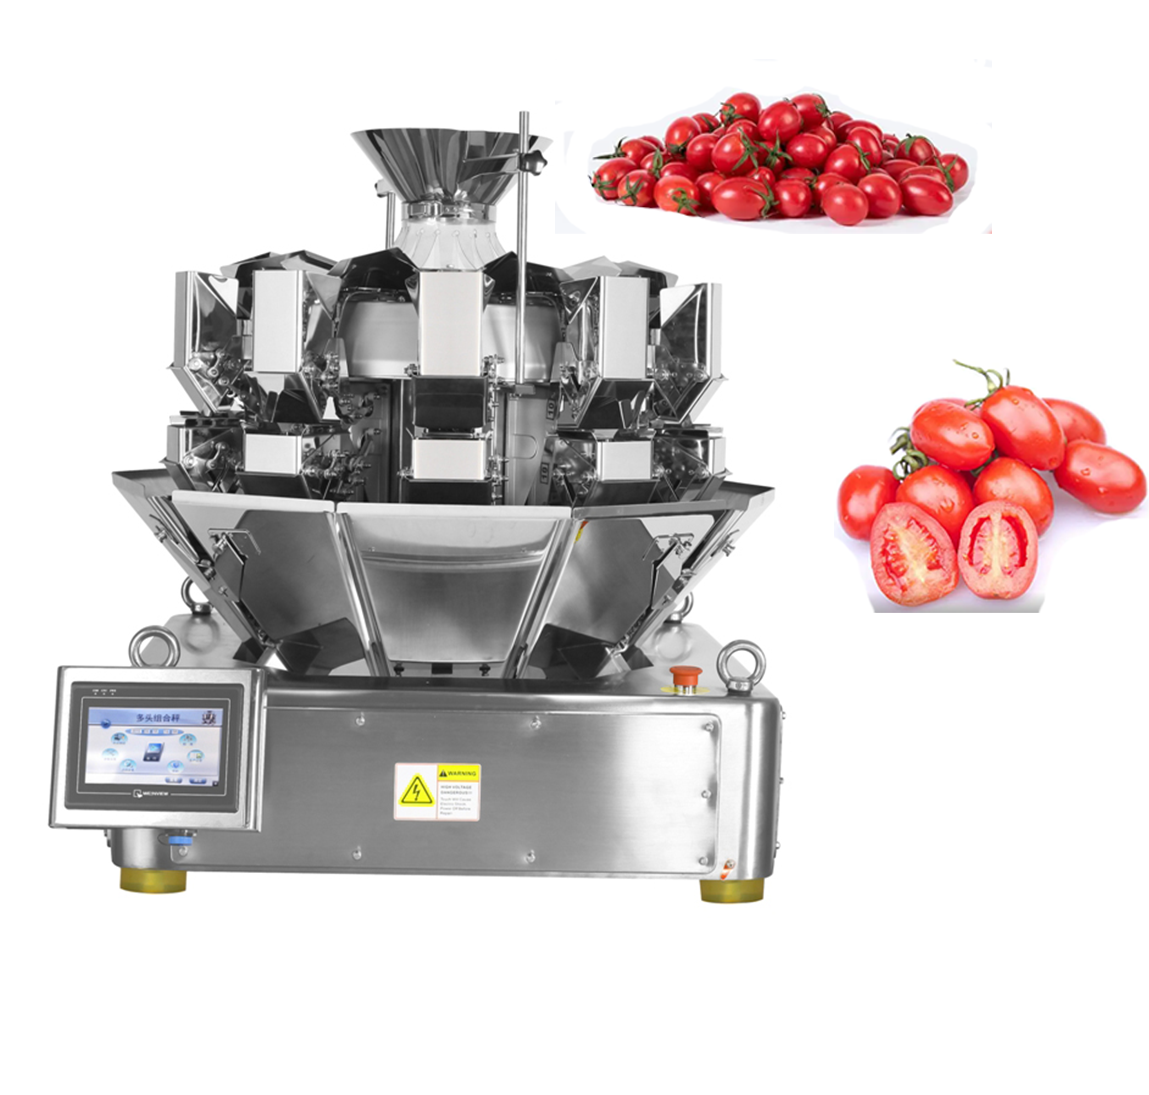 Reasonable price Factory Price Cherry Tomato Packing Machine with Multihead Weigher